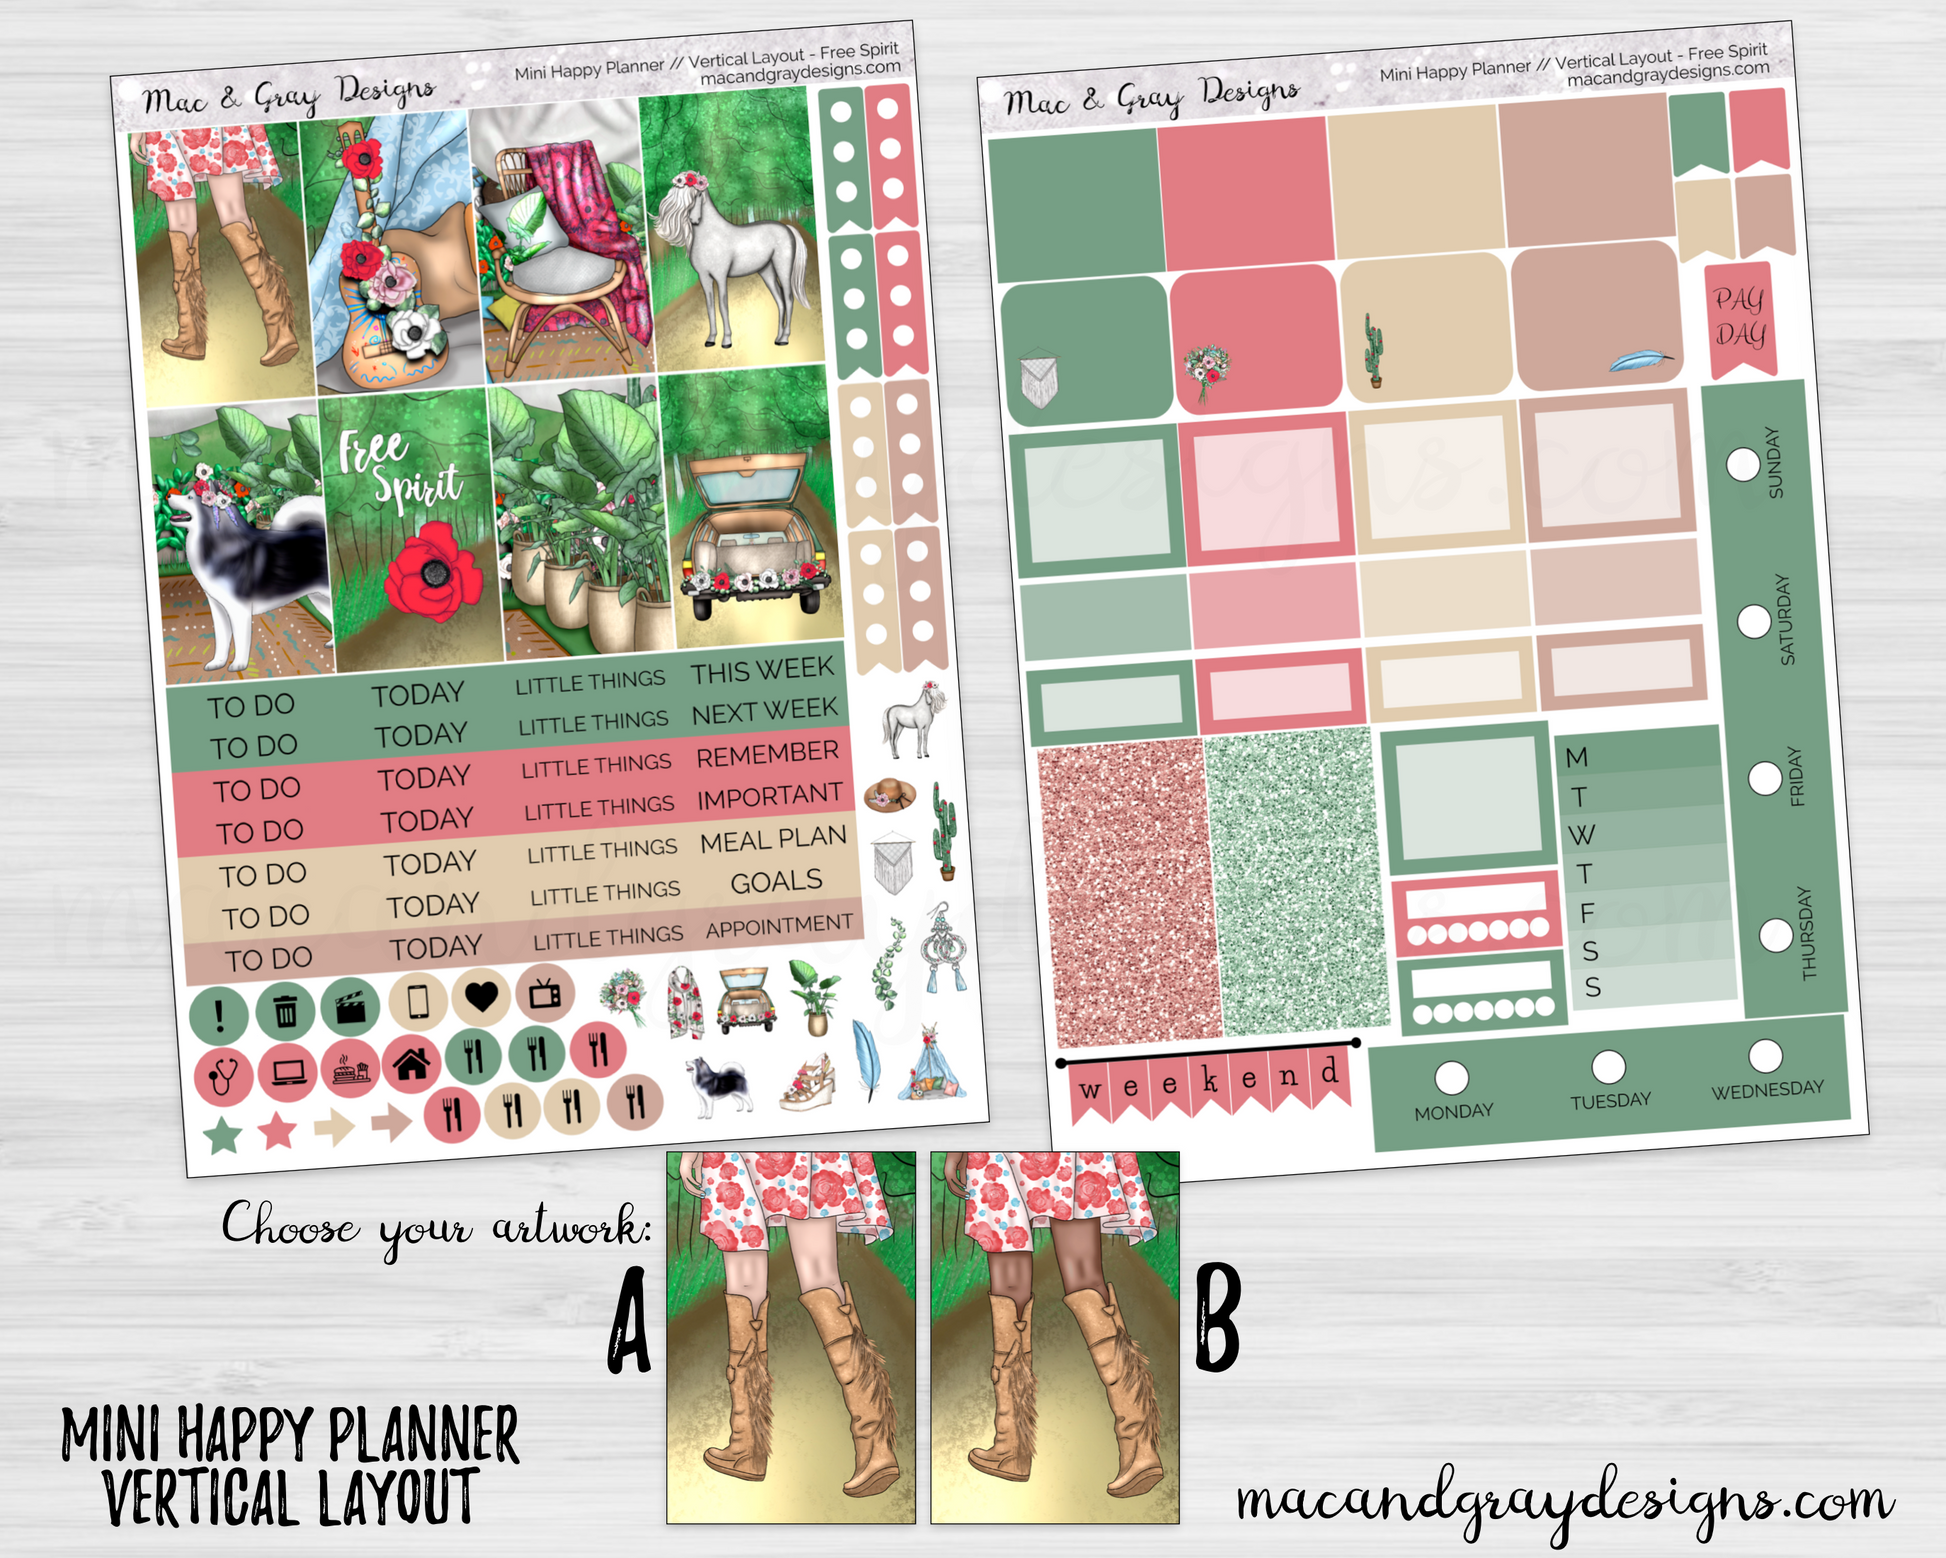 Magic (Disney Inspired) Full Weekly Kit Printable Planner Stickers (for use  with Standard Vertical A5 Wide Planners)